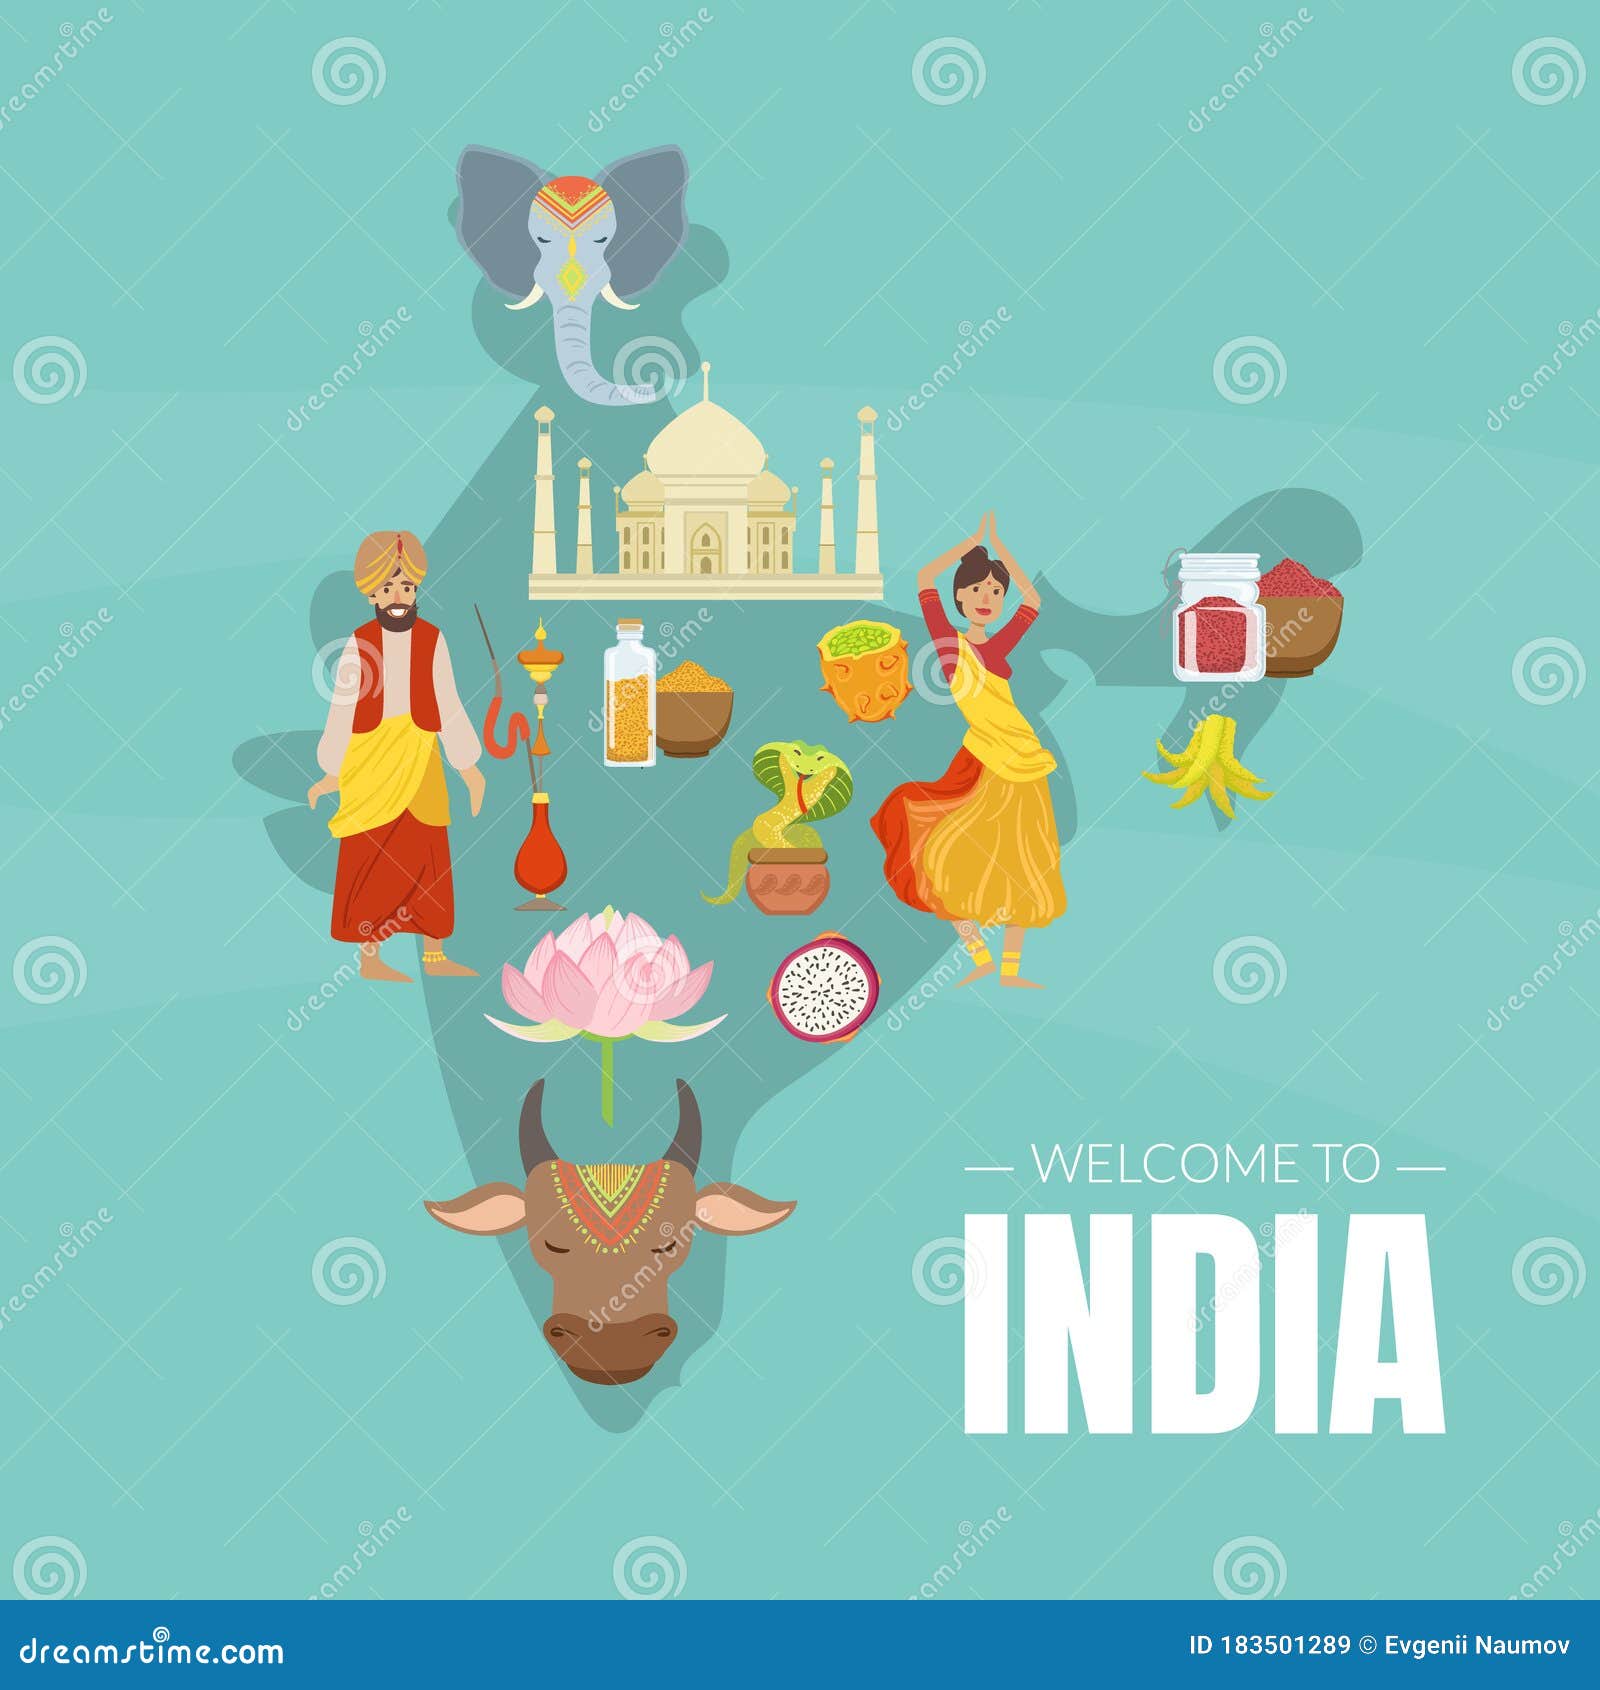 Culture India Color: Over 126,478 Royalty-Free Licensable Stock  Illustrations & Drawings | Shutterstock